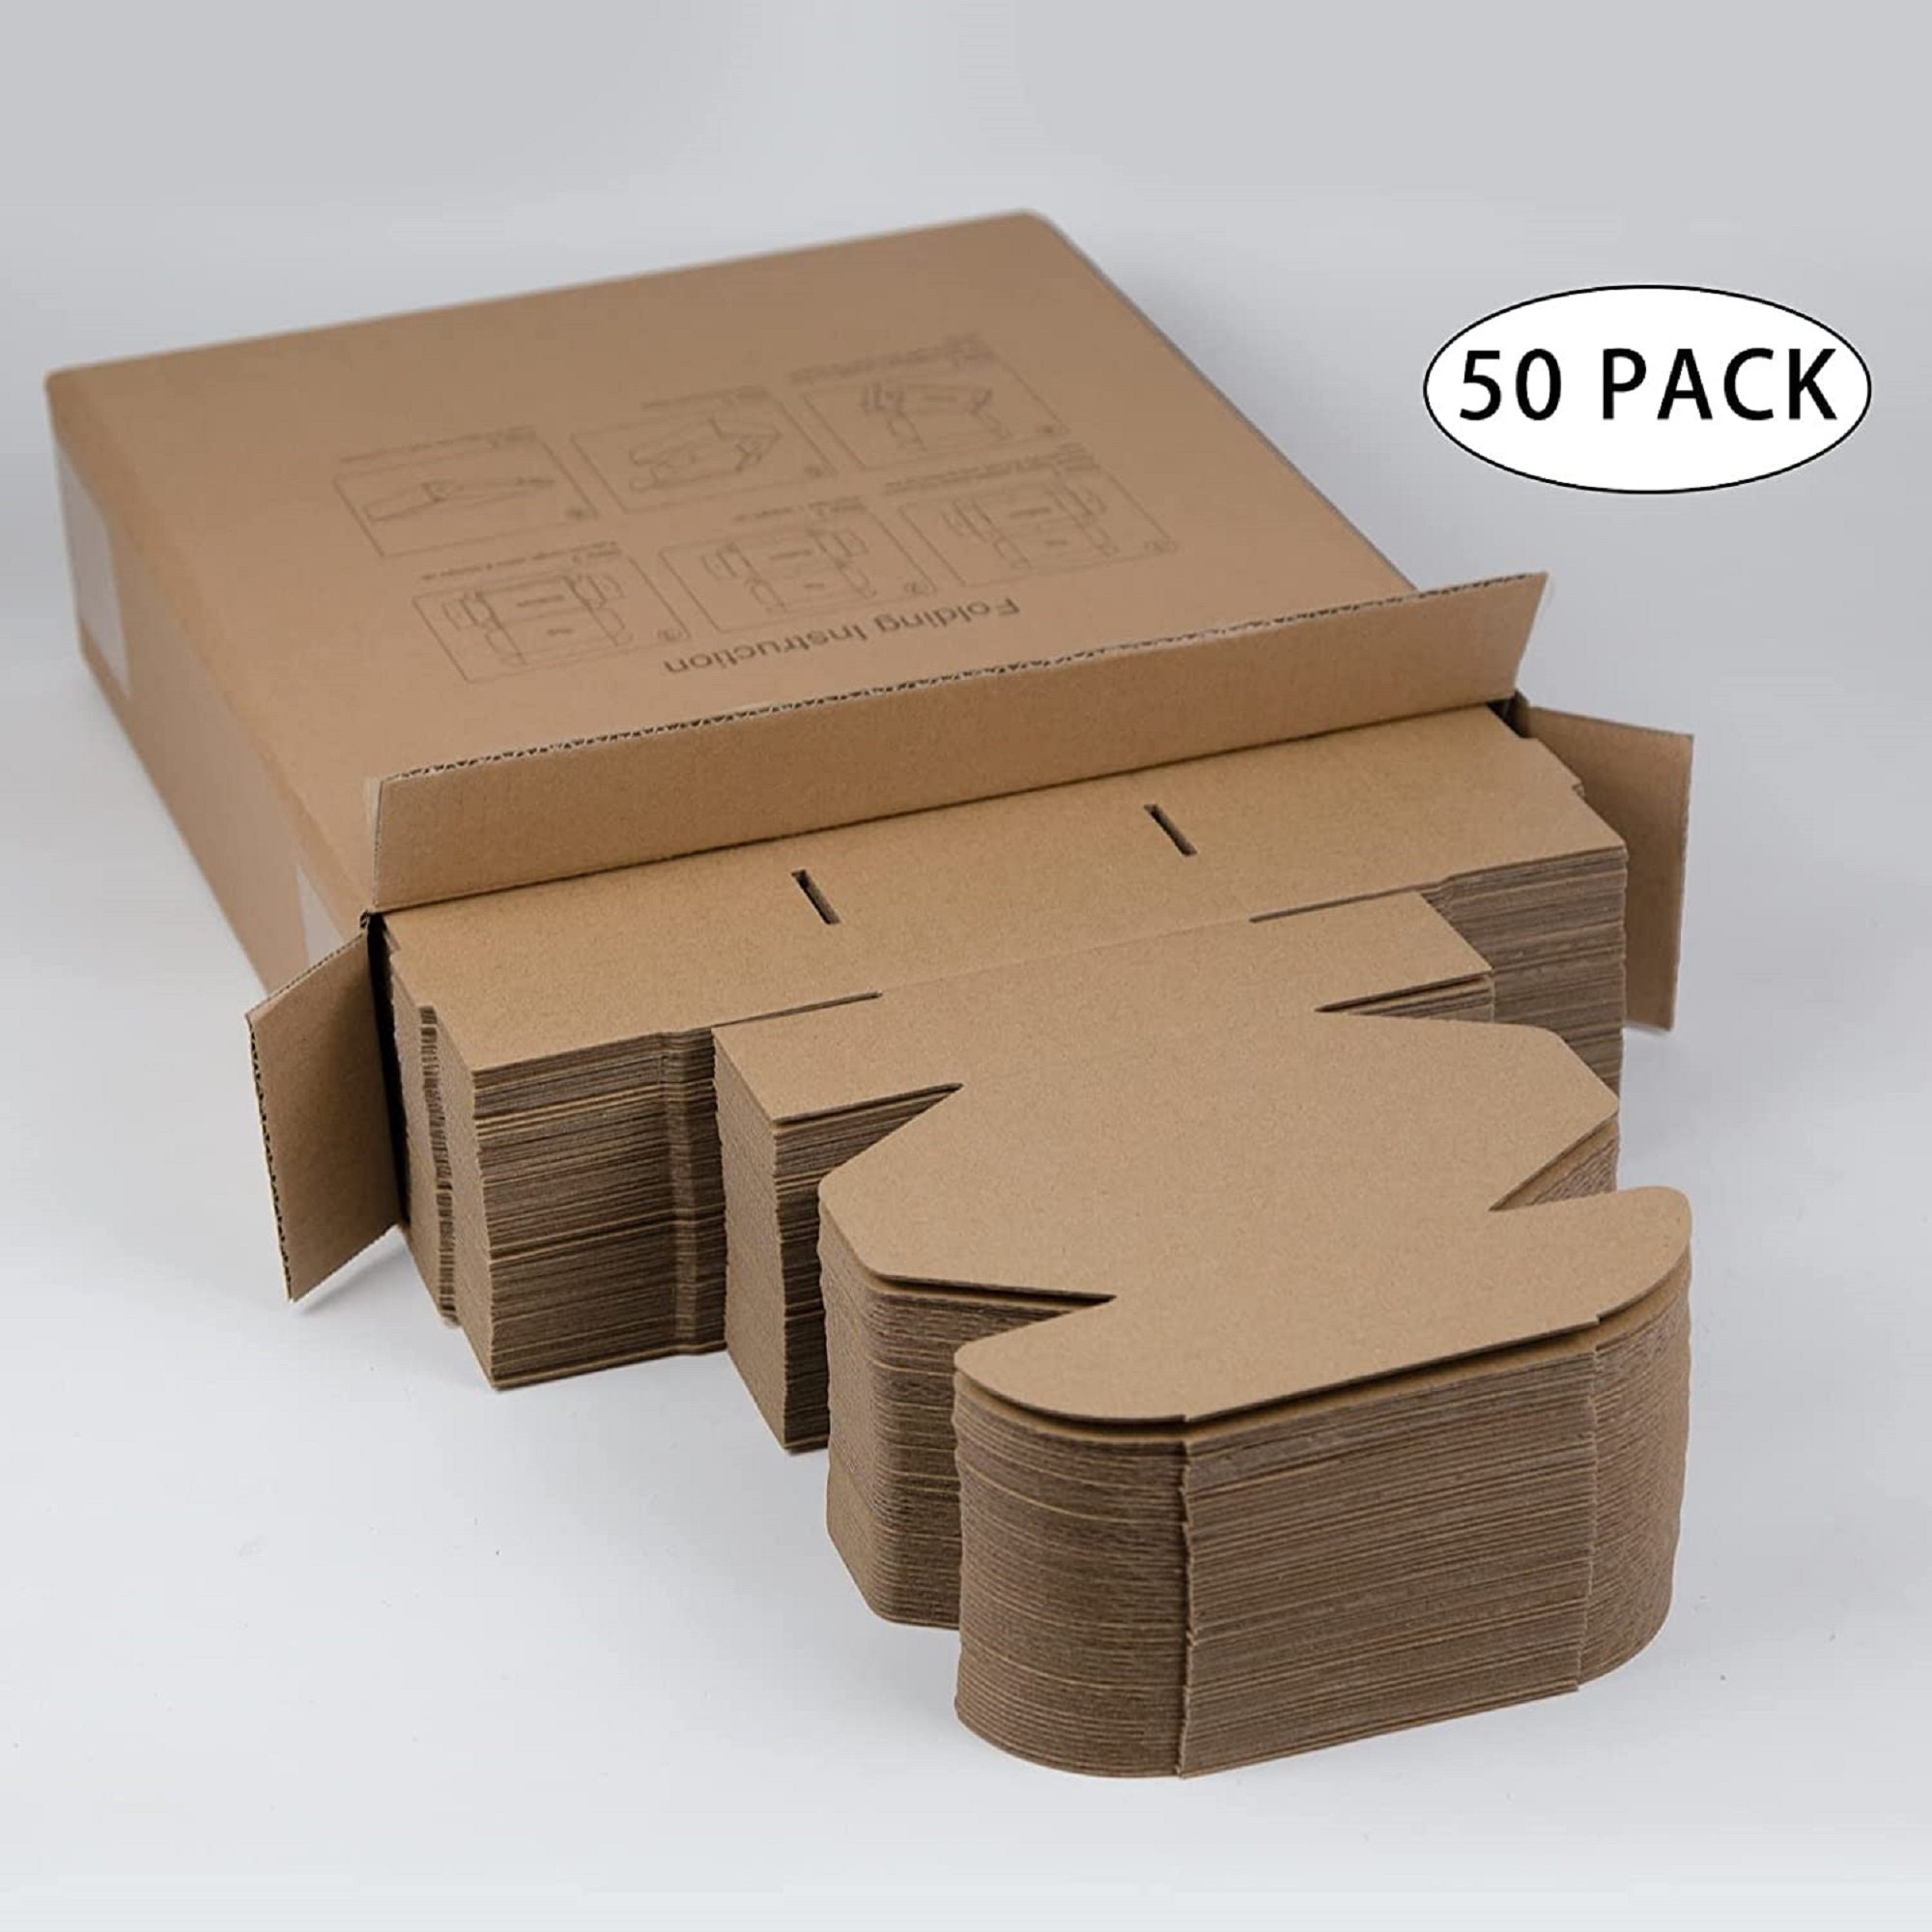 8 X 8 X 2.3 Cardboard Boxes With Lids Square Box Gift Boxes Medium Size  Corrugated Box Packaging Supplies Carton Paper Boxes Gift Wrapping 